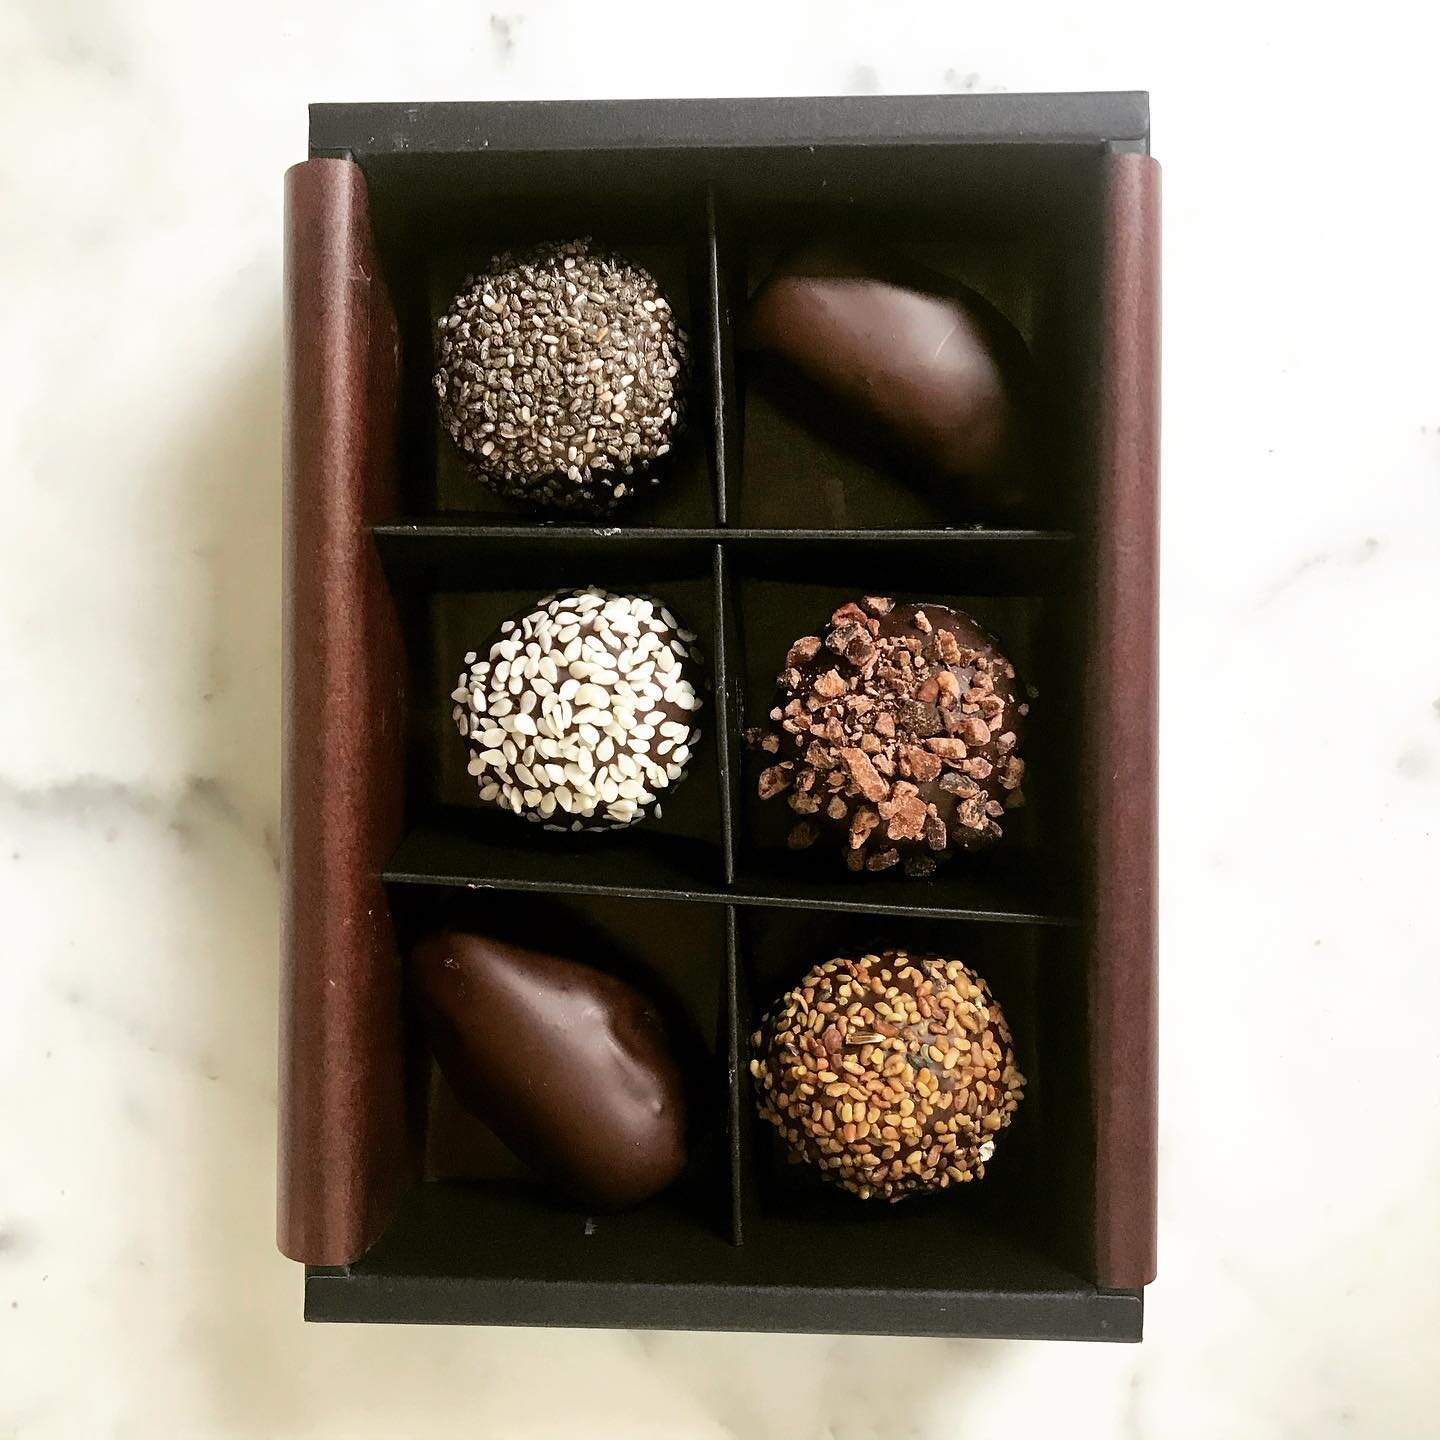 Have you tried our #RestoreBox yet? One of new favourite flavours is tucked inside this box with matcha, roasted almonds and sprinkling of golden alfalfa seeds. Our box of delights for the weekend. 

#chocolatecoveredwellness

#vegan #glutenfree #dai